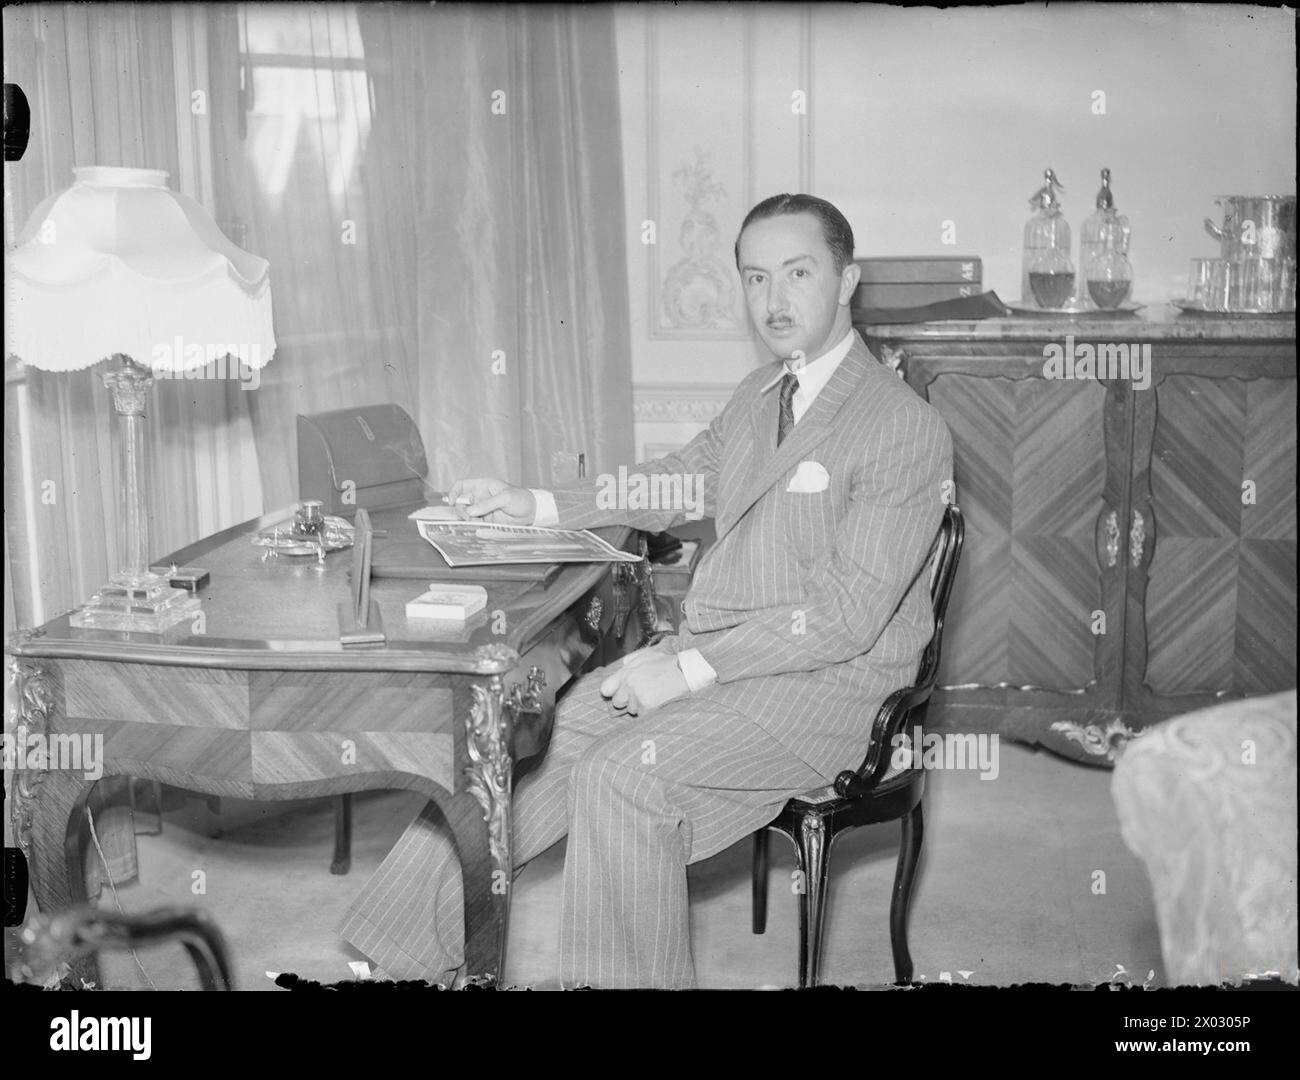 HIS ROYAL HIGHNESS THE EMIR ABDUL ILLAH, REGENT OF IRAQ, LONDON, ENGLAND, UK, JULY 1945 - A portrait of the Regent of Iraq sitting at his desk in his room at Claridge's Hotel in London. According to the original caption, the Regent spent July in England on his way back to Iraq following the San Francisco conference. He is looking at a group photograph, possibly taken at the Conference  Abdul-Illah, Emir of Iraq Stock Photo